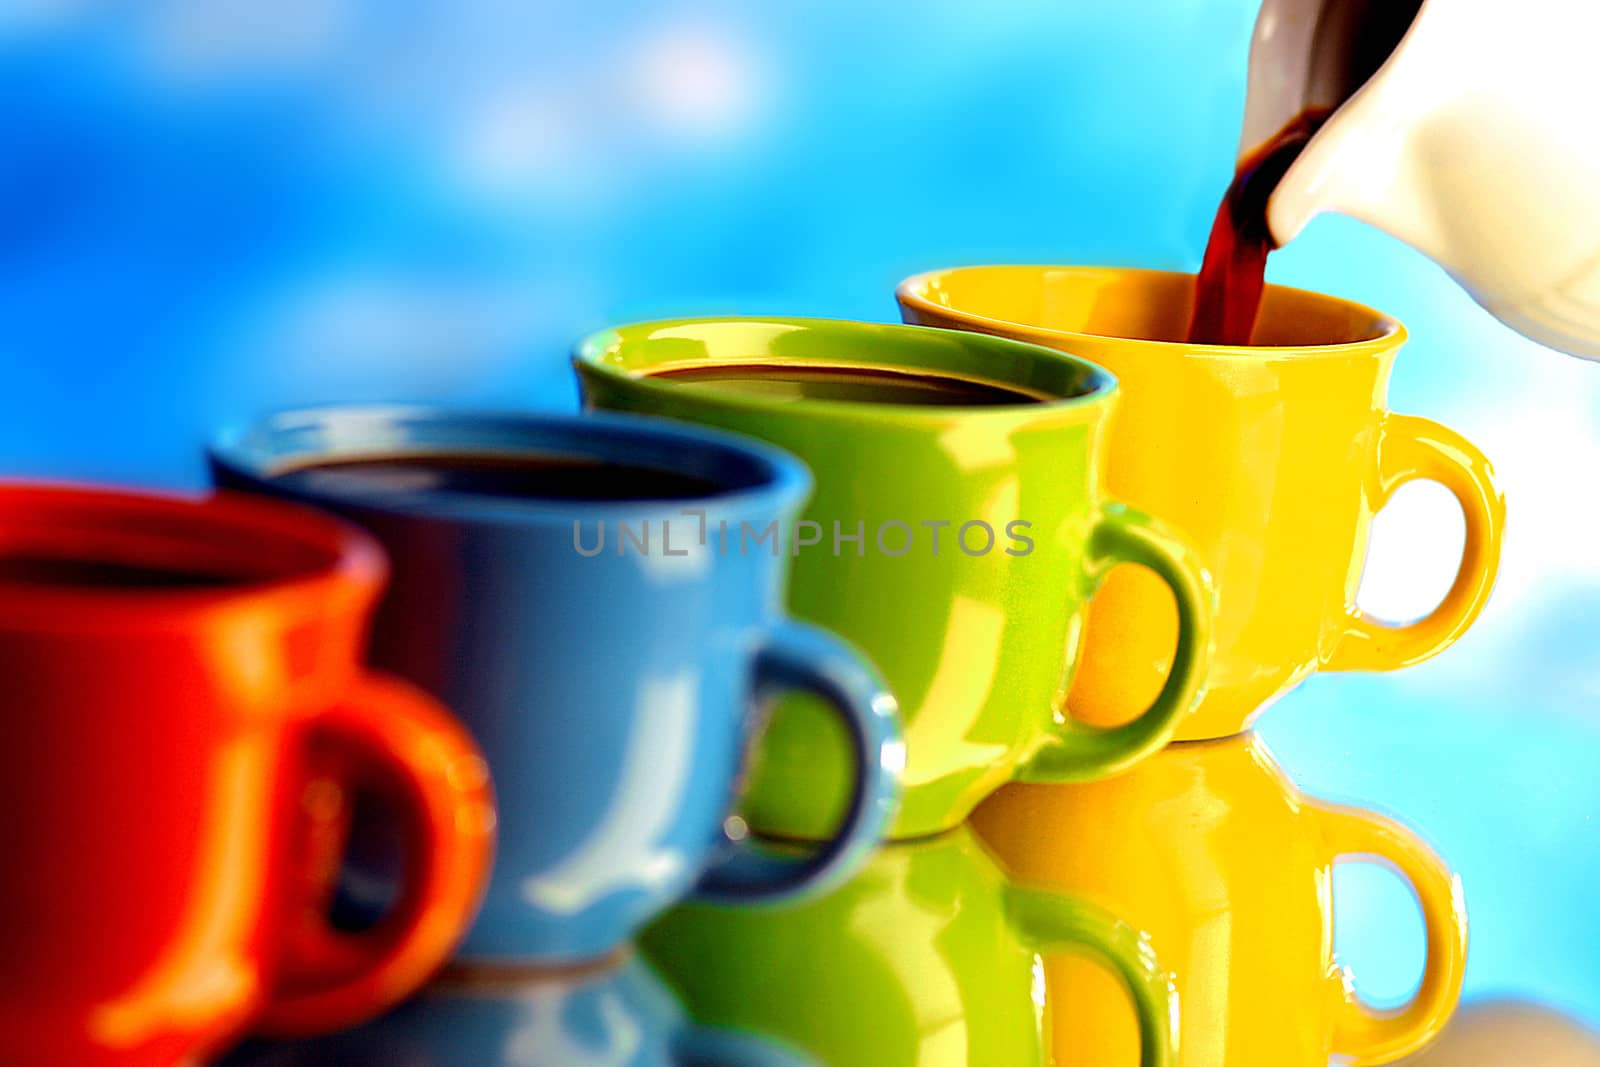 Pouring fresh coffee in various colorful cups.